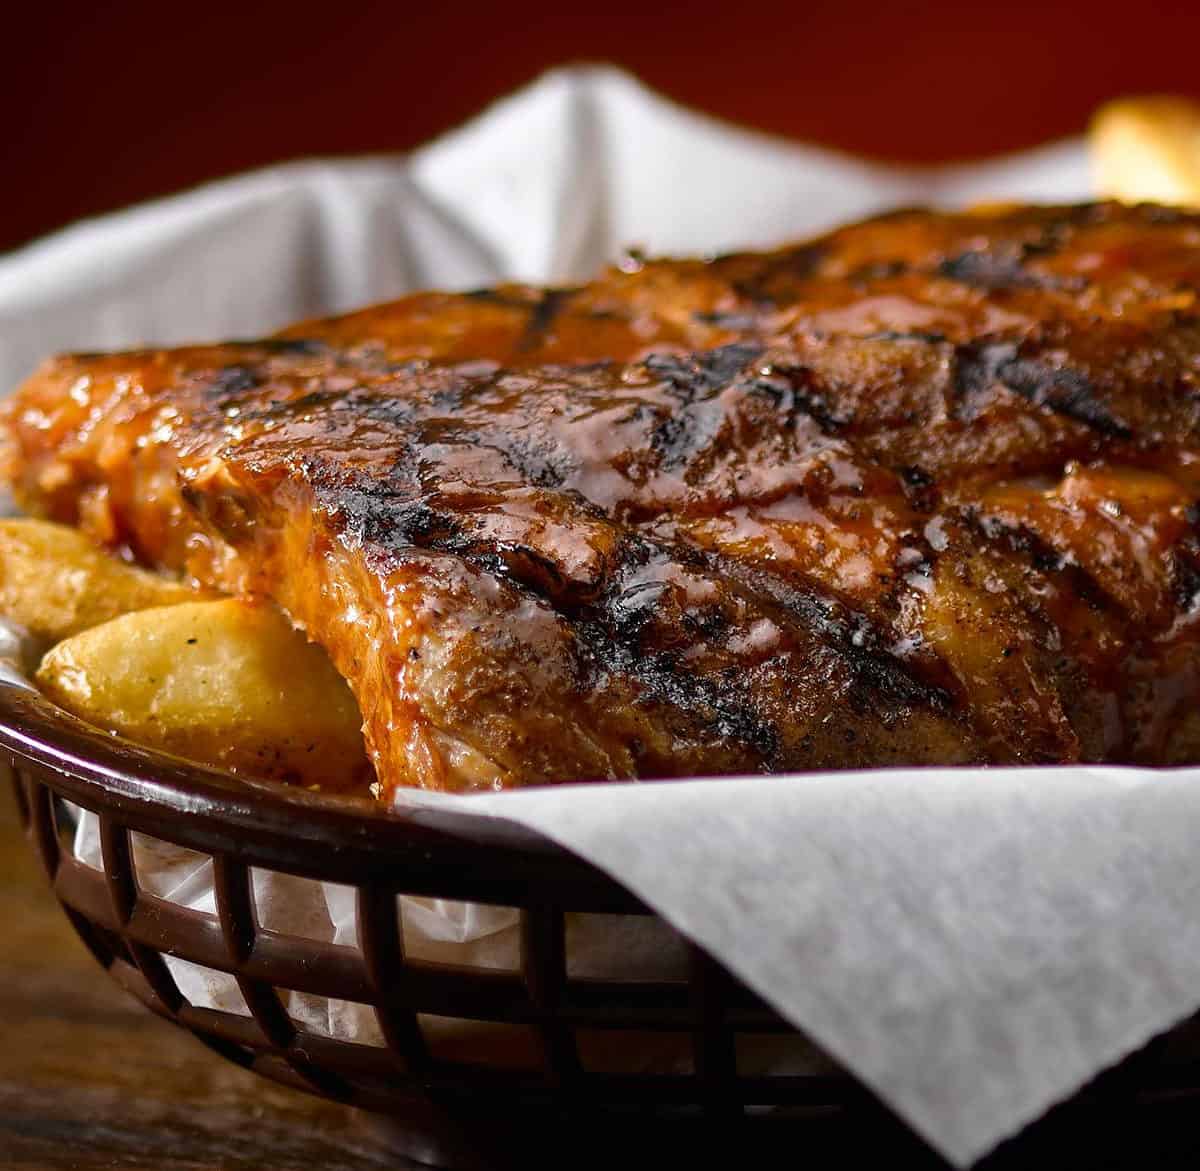  These ribs might be copycats, but they are just as delicious as the real deal.